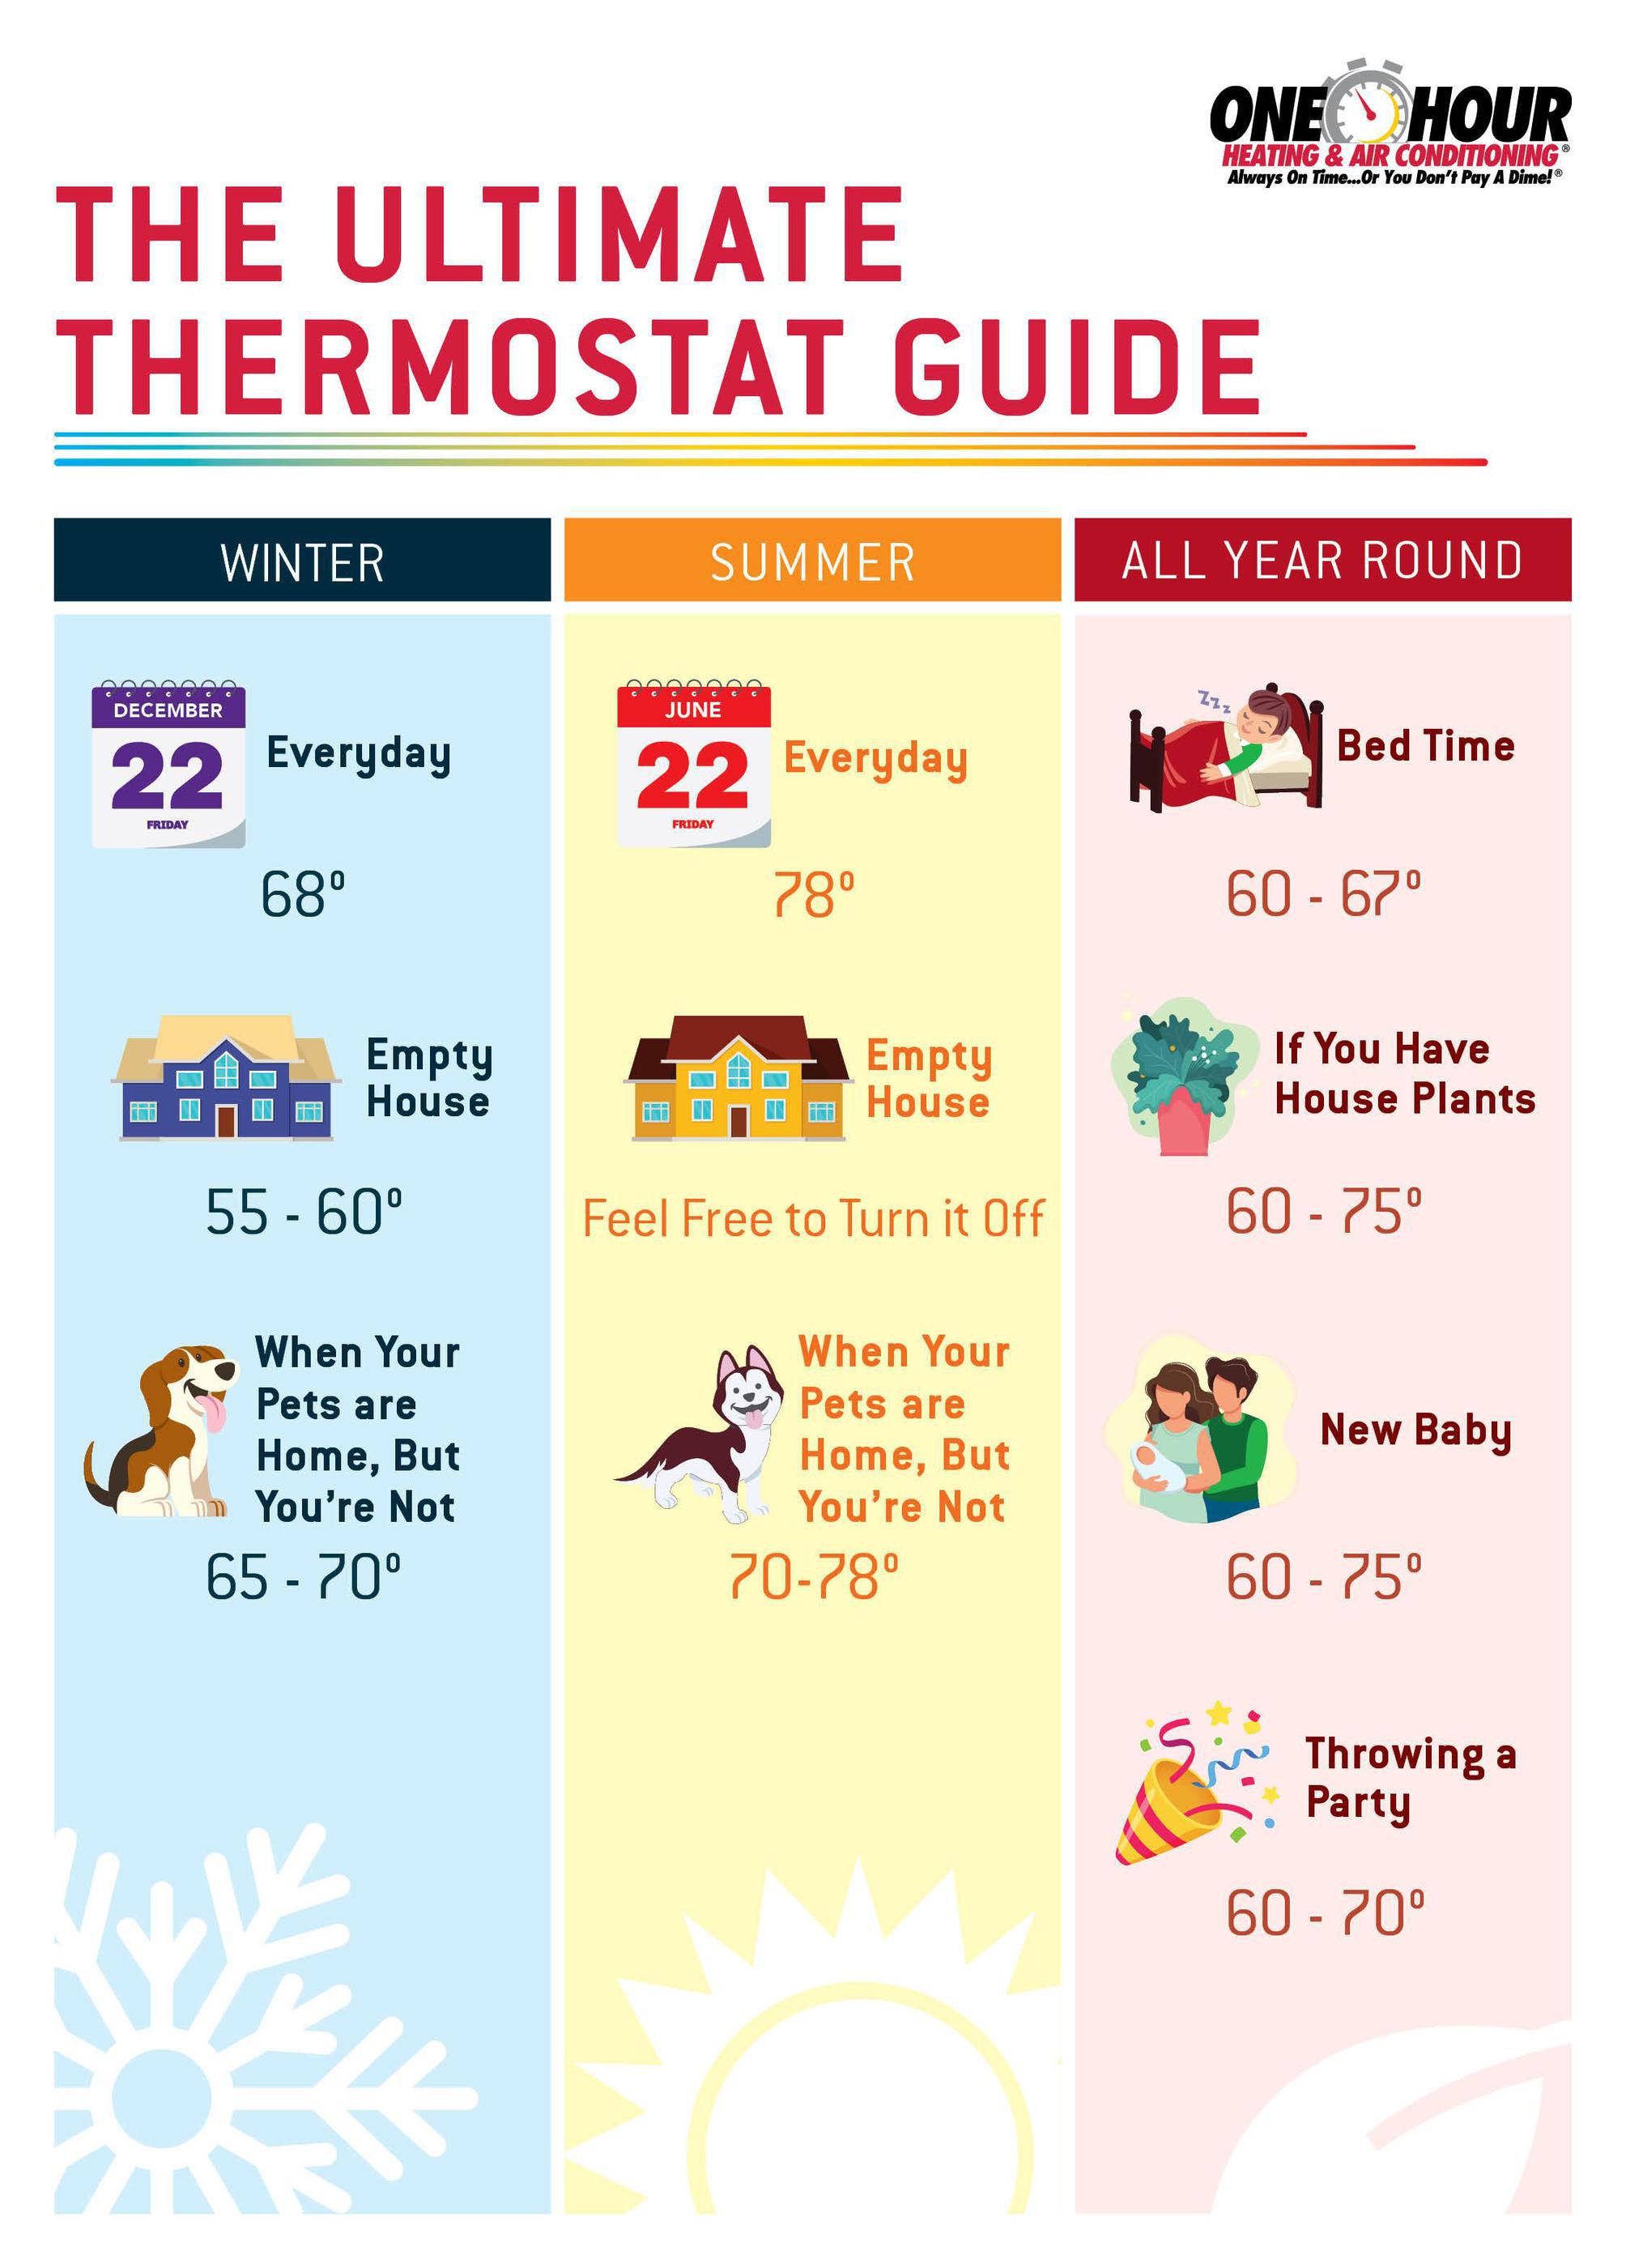 The Ultimate Thermostat Guide